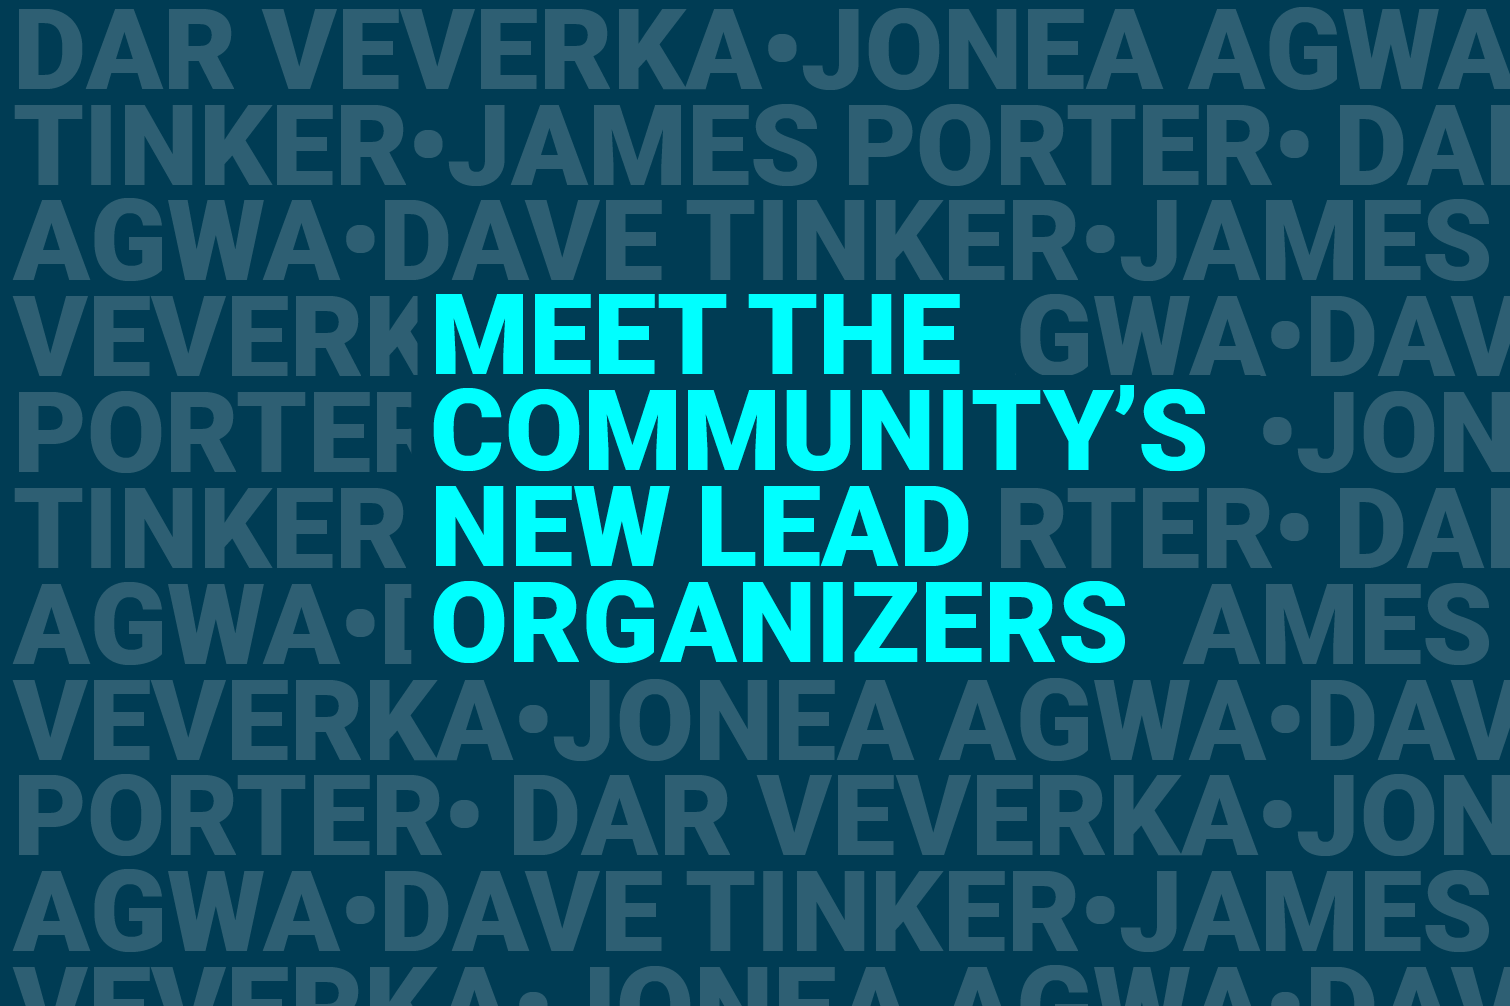 Meet the Communitys Lead Organizers set against a repeating background of the organizers names: Dave Tinker, James Porter, Dar Veverka, and Jonea Agwa.